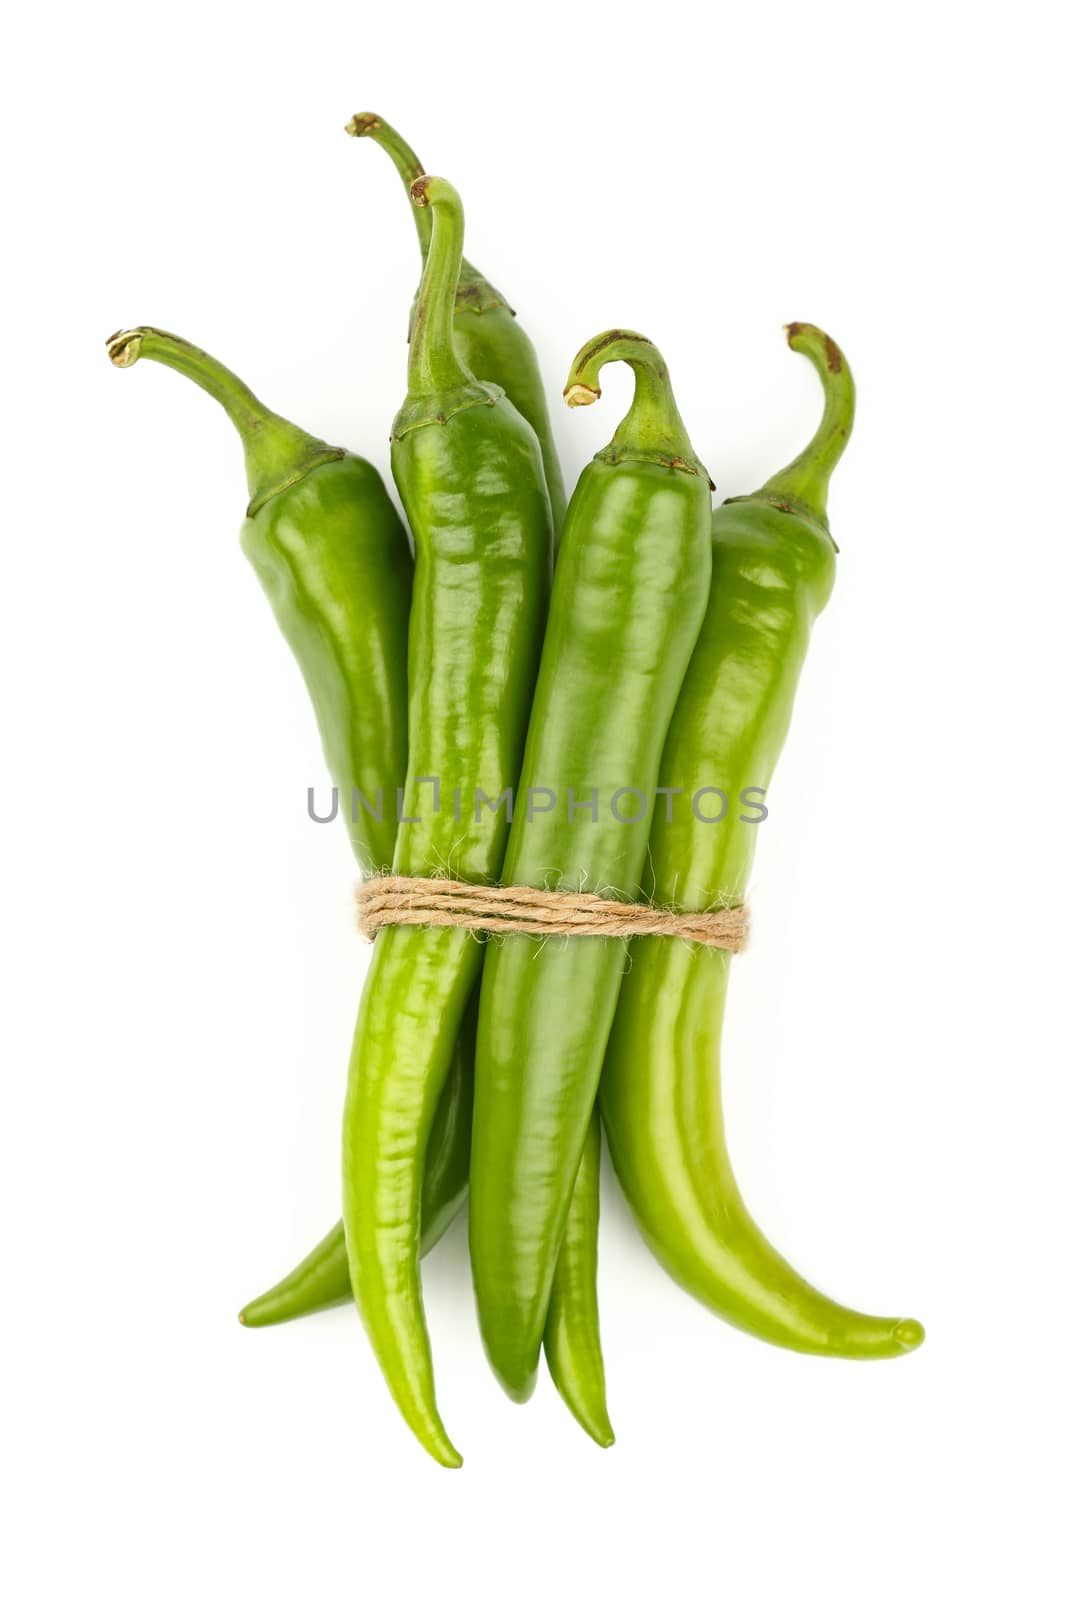 One bunch of fresh green jalapeno hot chili peppers with natural twine isolated on white background, close up, elevated top view